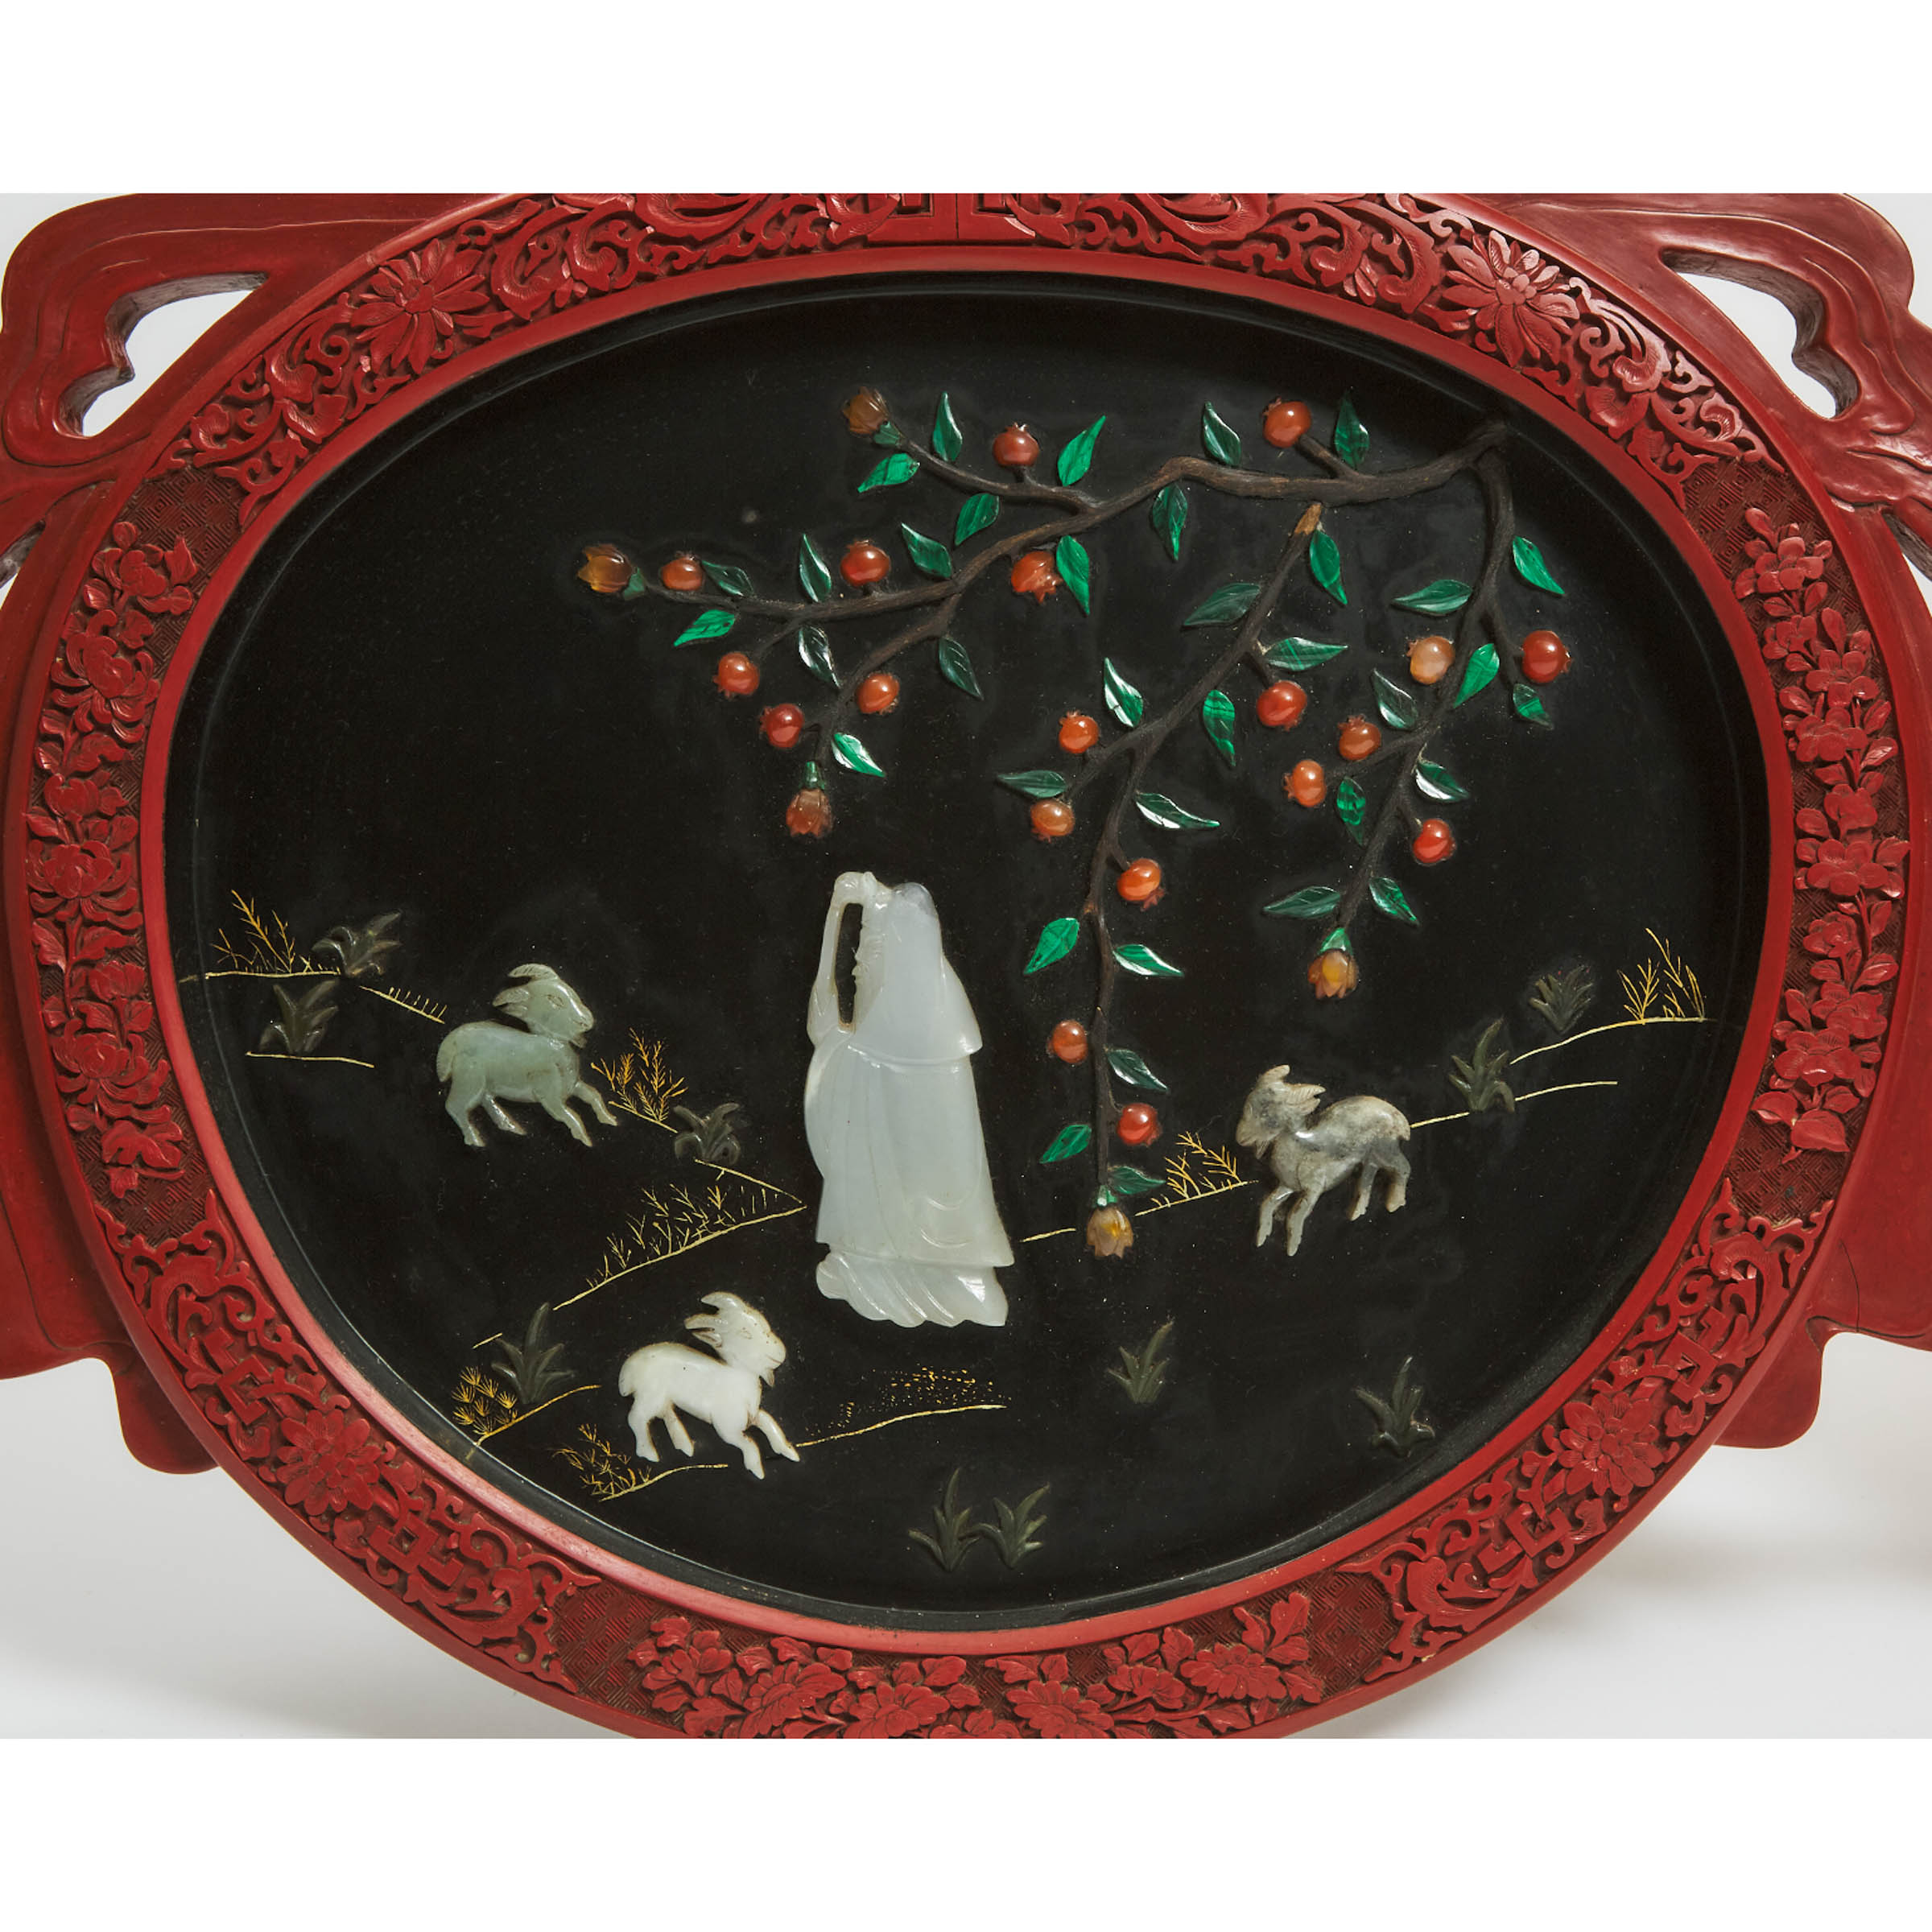 A Pair of Red Lacquer Panels Inlaid With Jade and Precious Stones, 19th Century